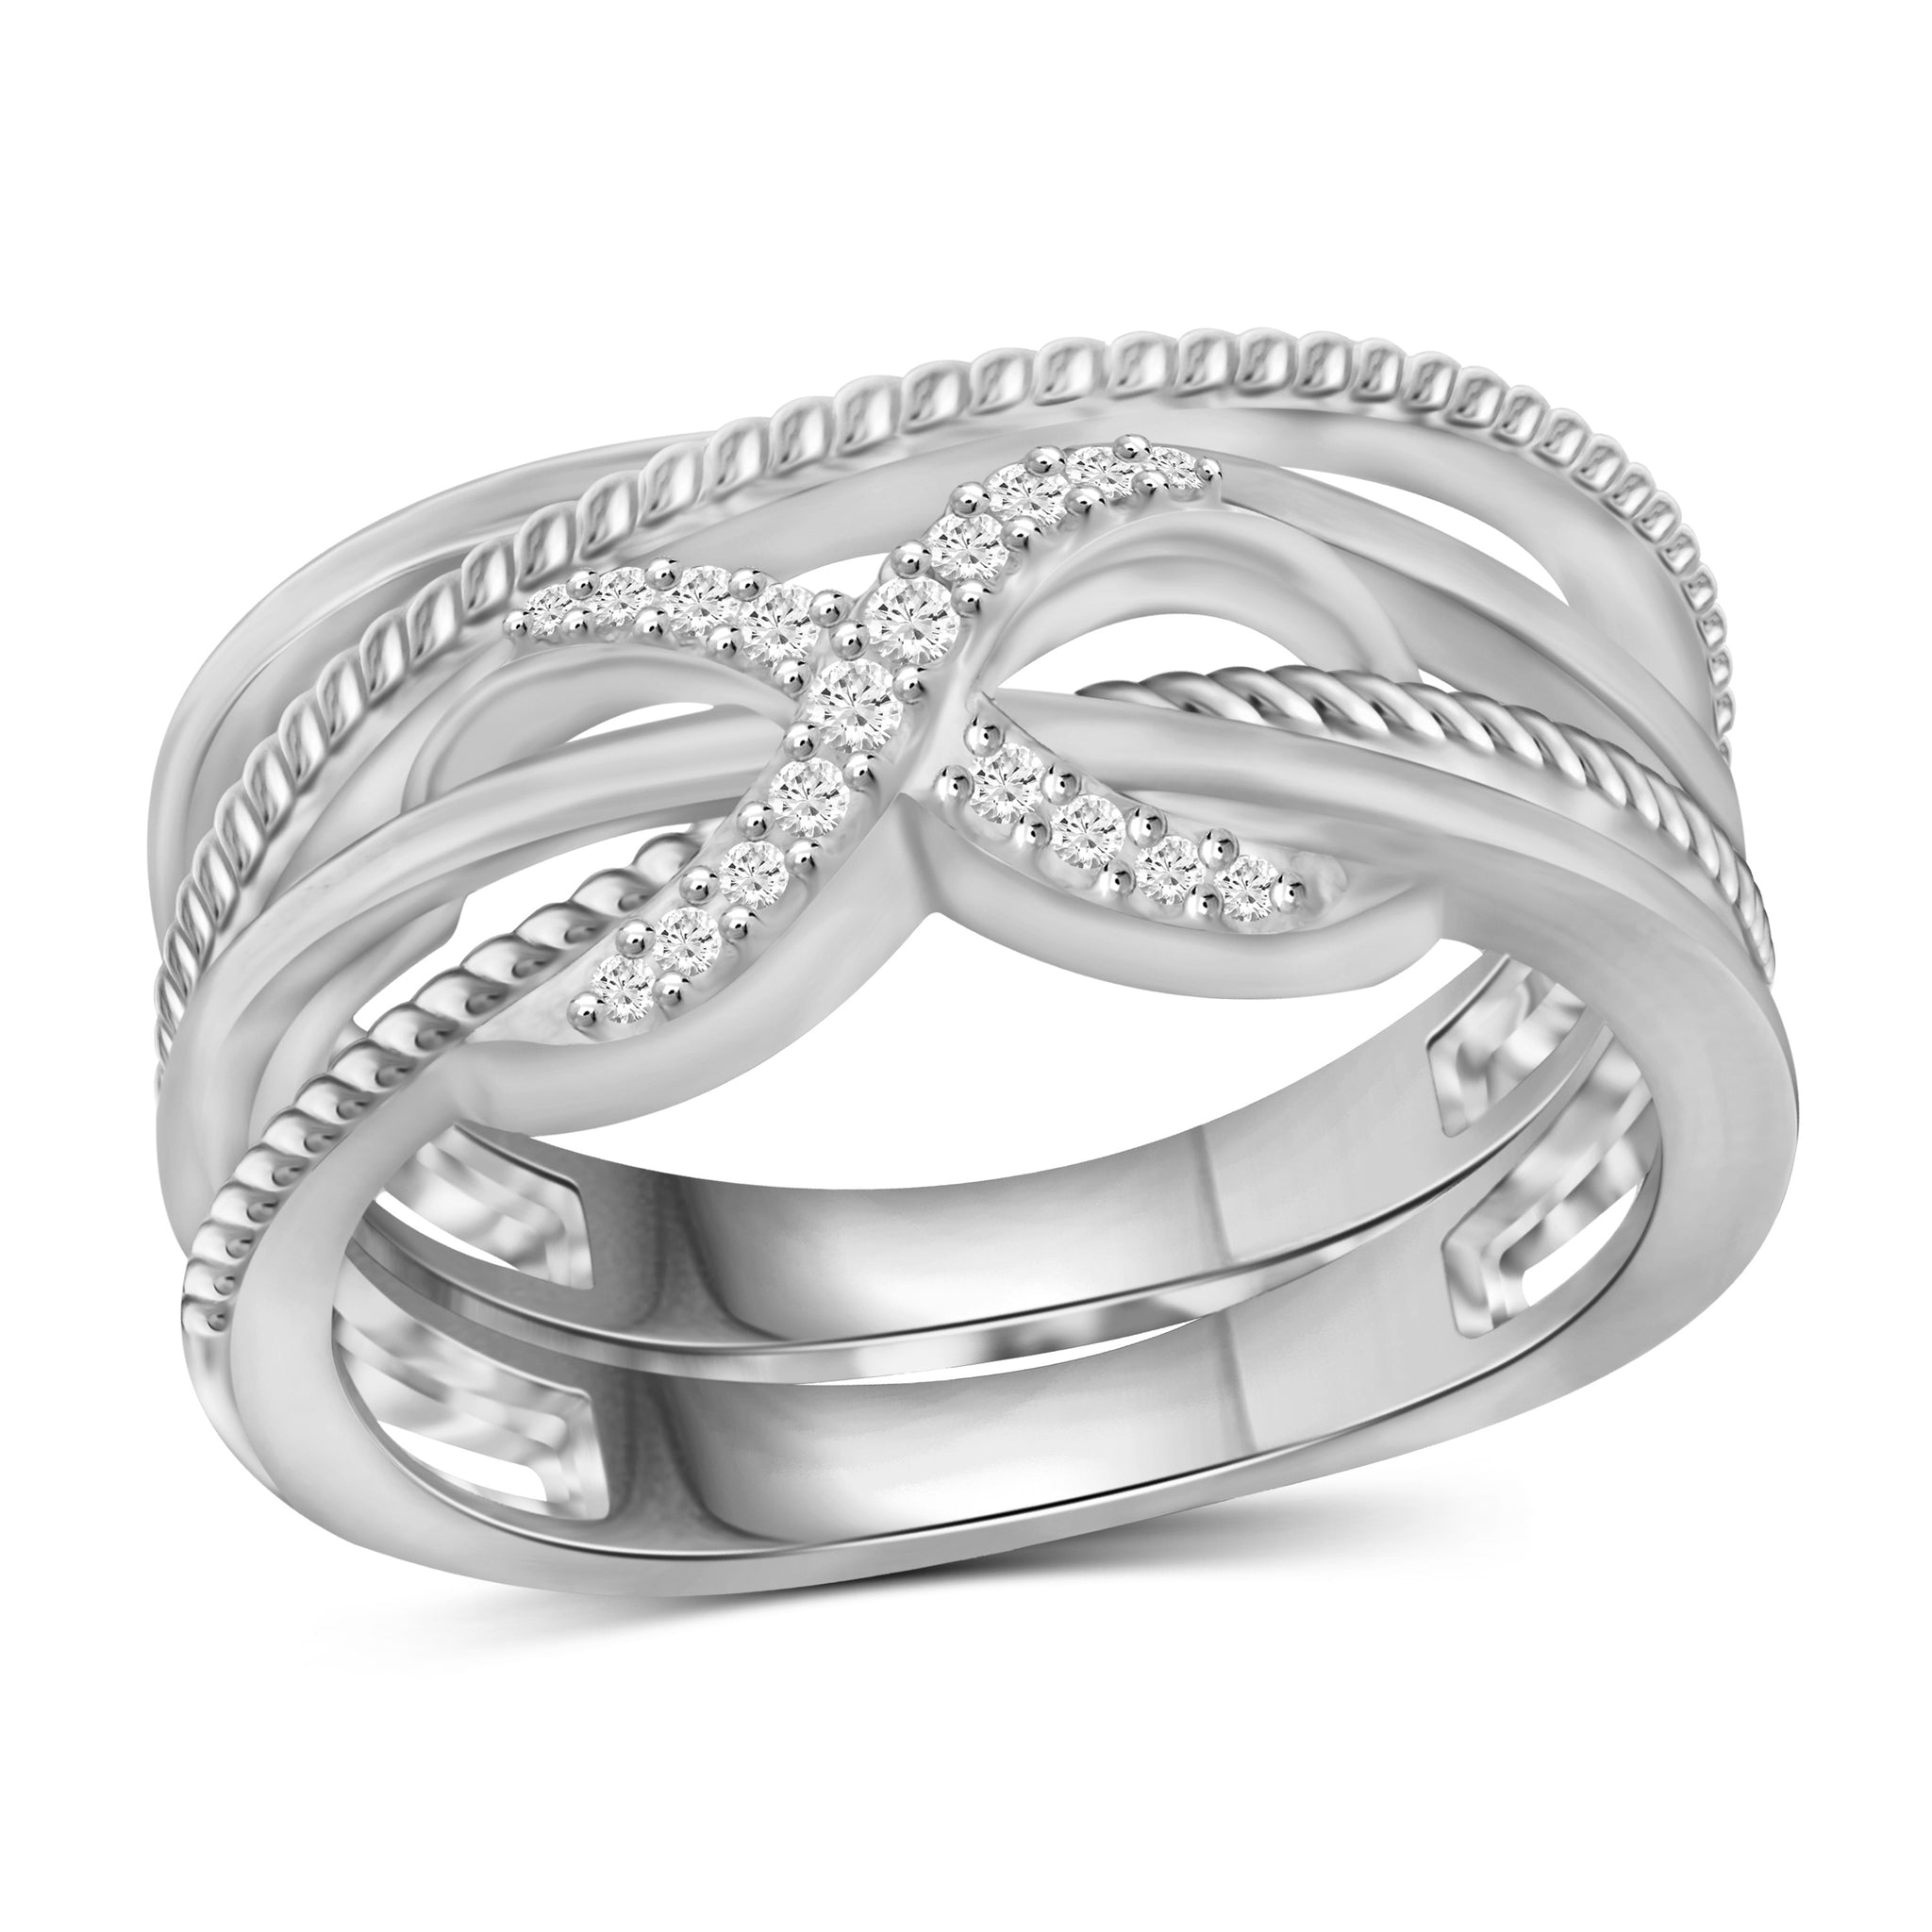 JewelonFire 1/10 Carat T.W. White Diamond Sterling Silver Infinity Stackable Ring - Assorted Colors